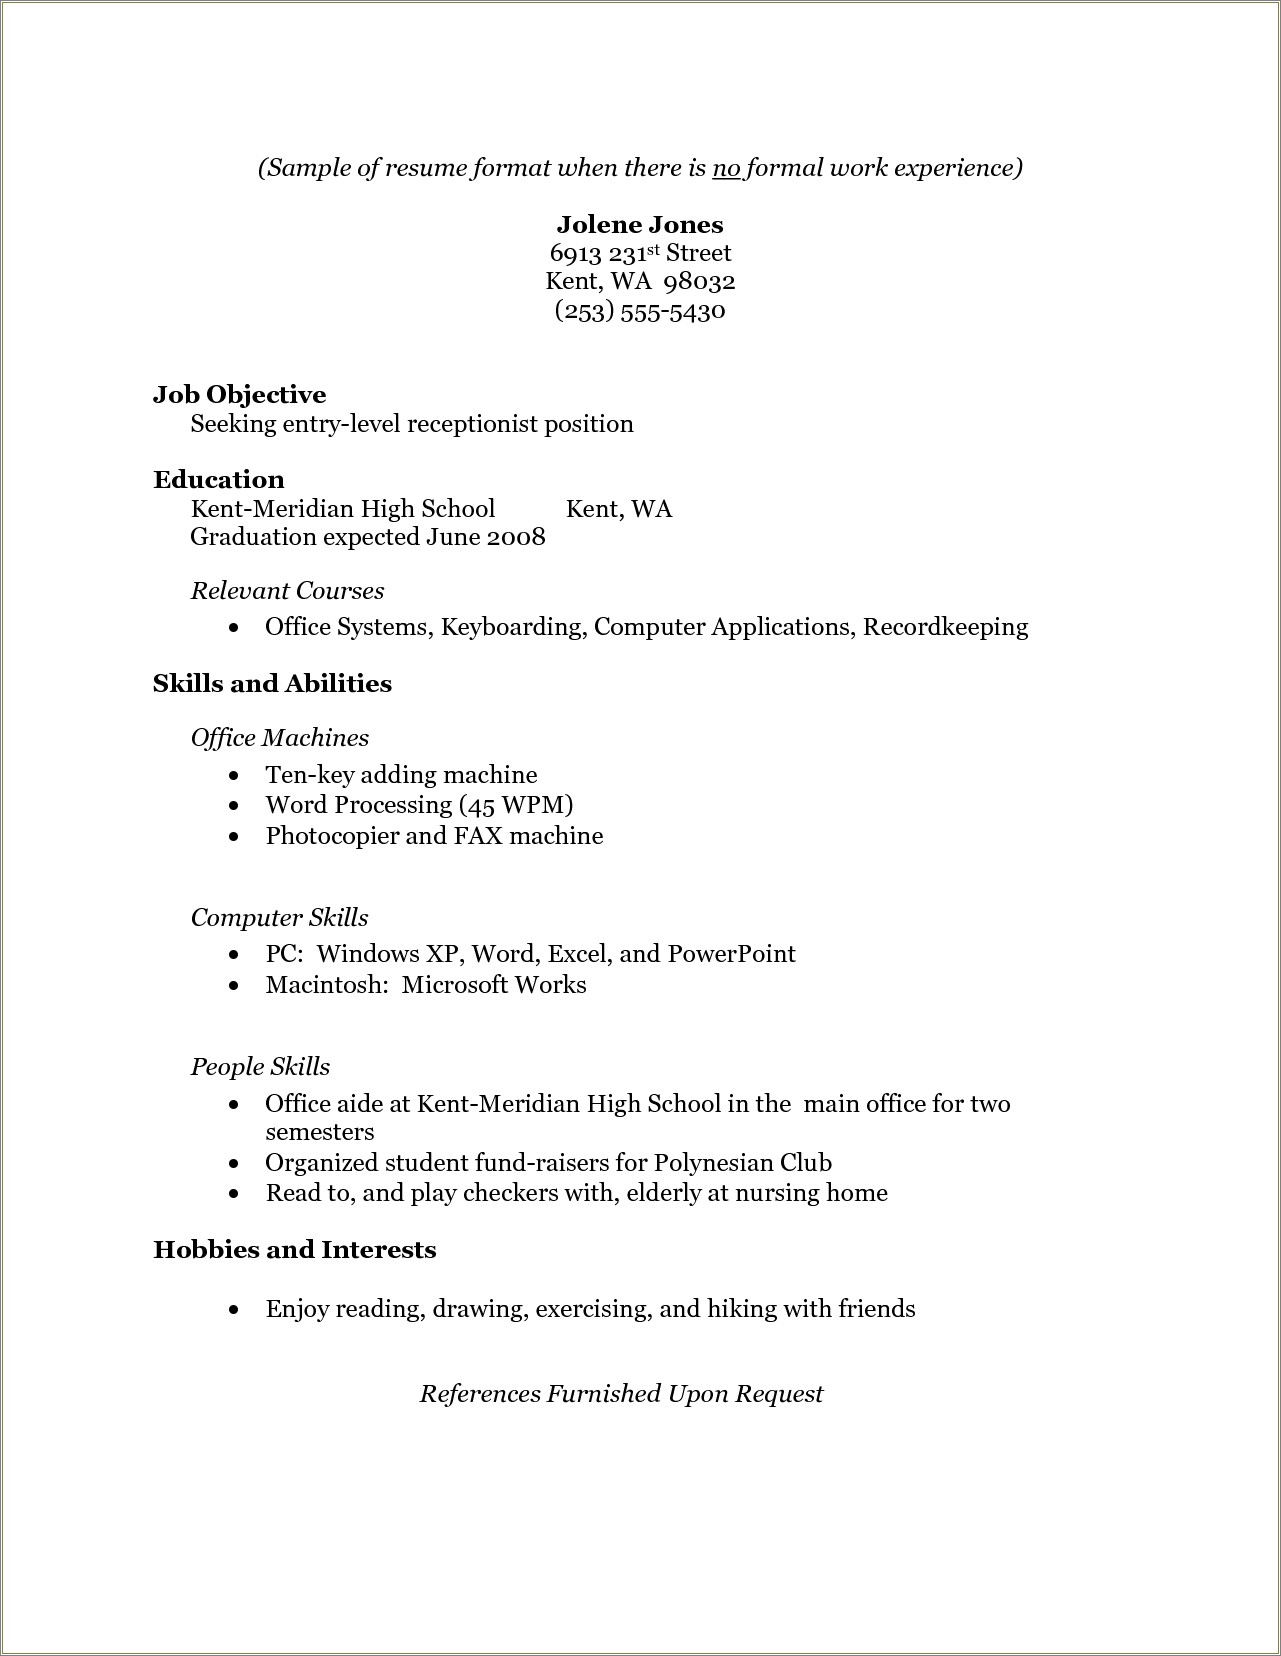 Resume Format With No Job Experience